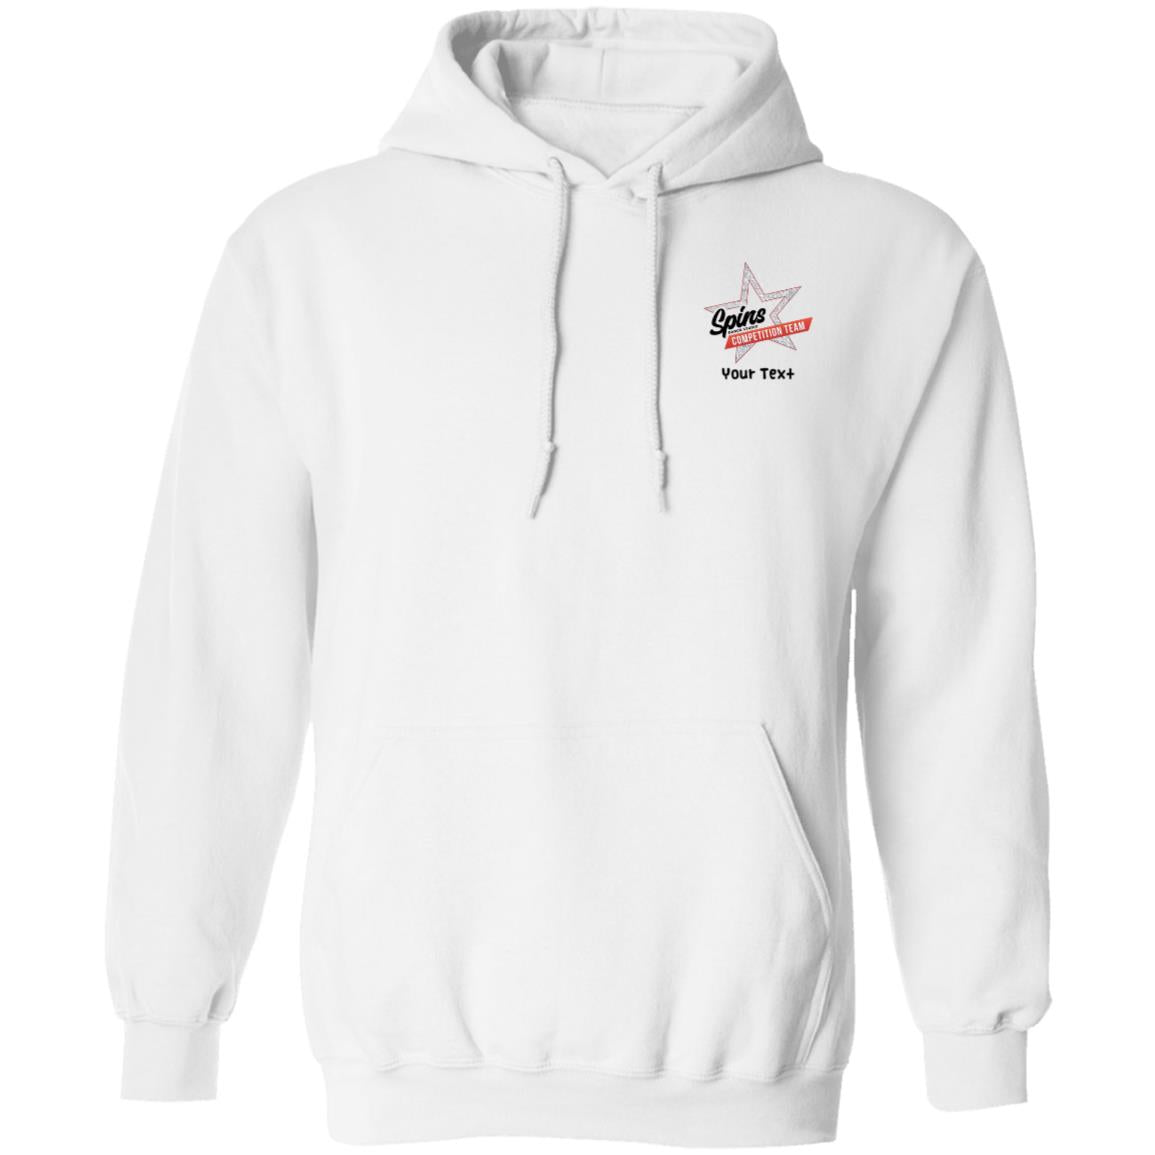 Spins Competition Team Pullover Hoodie - With Personalization